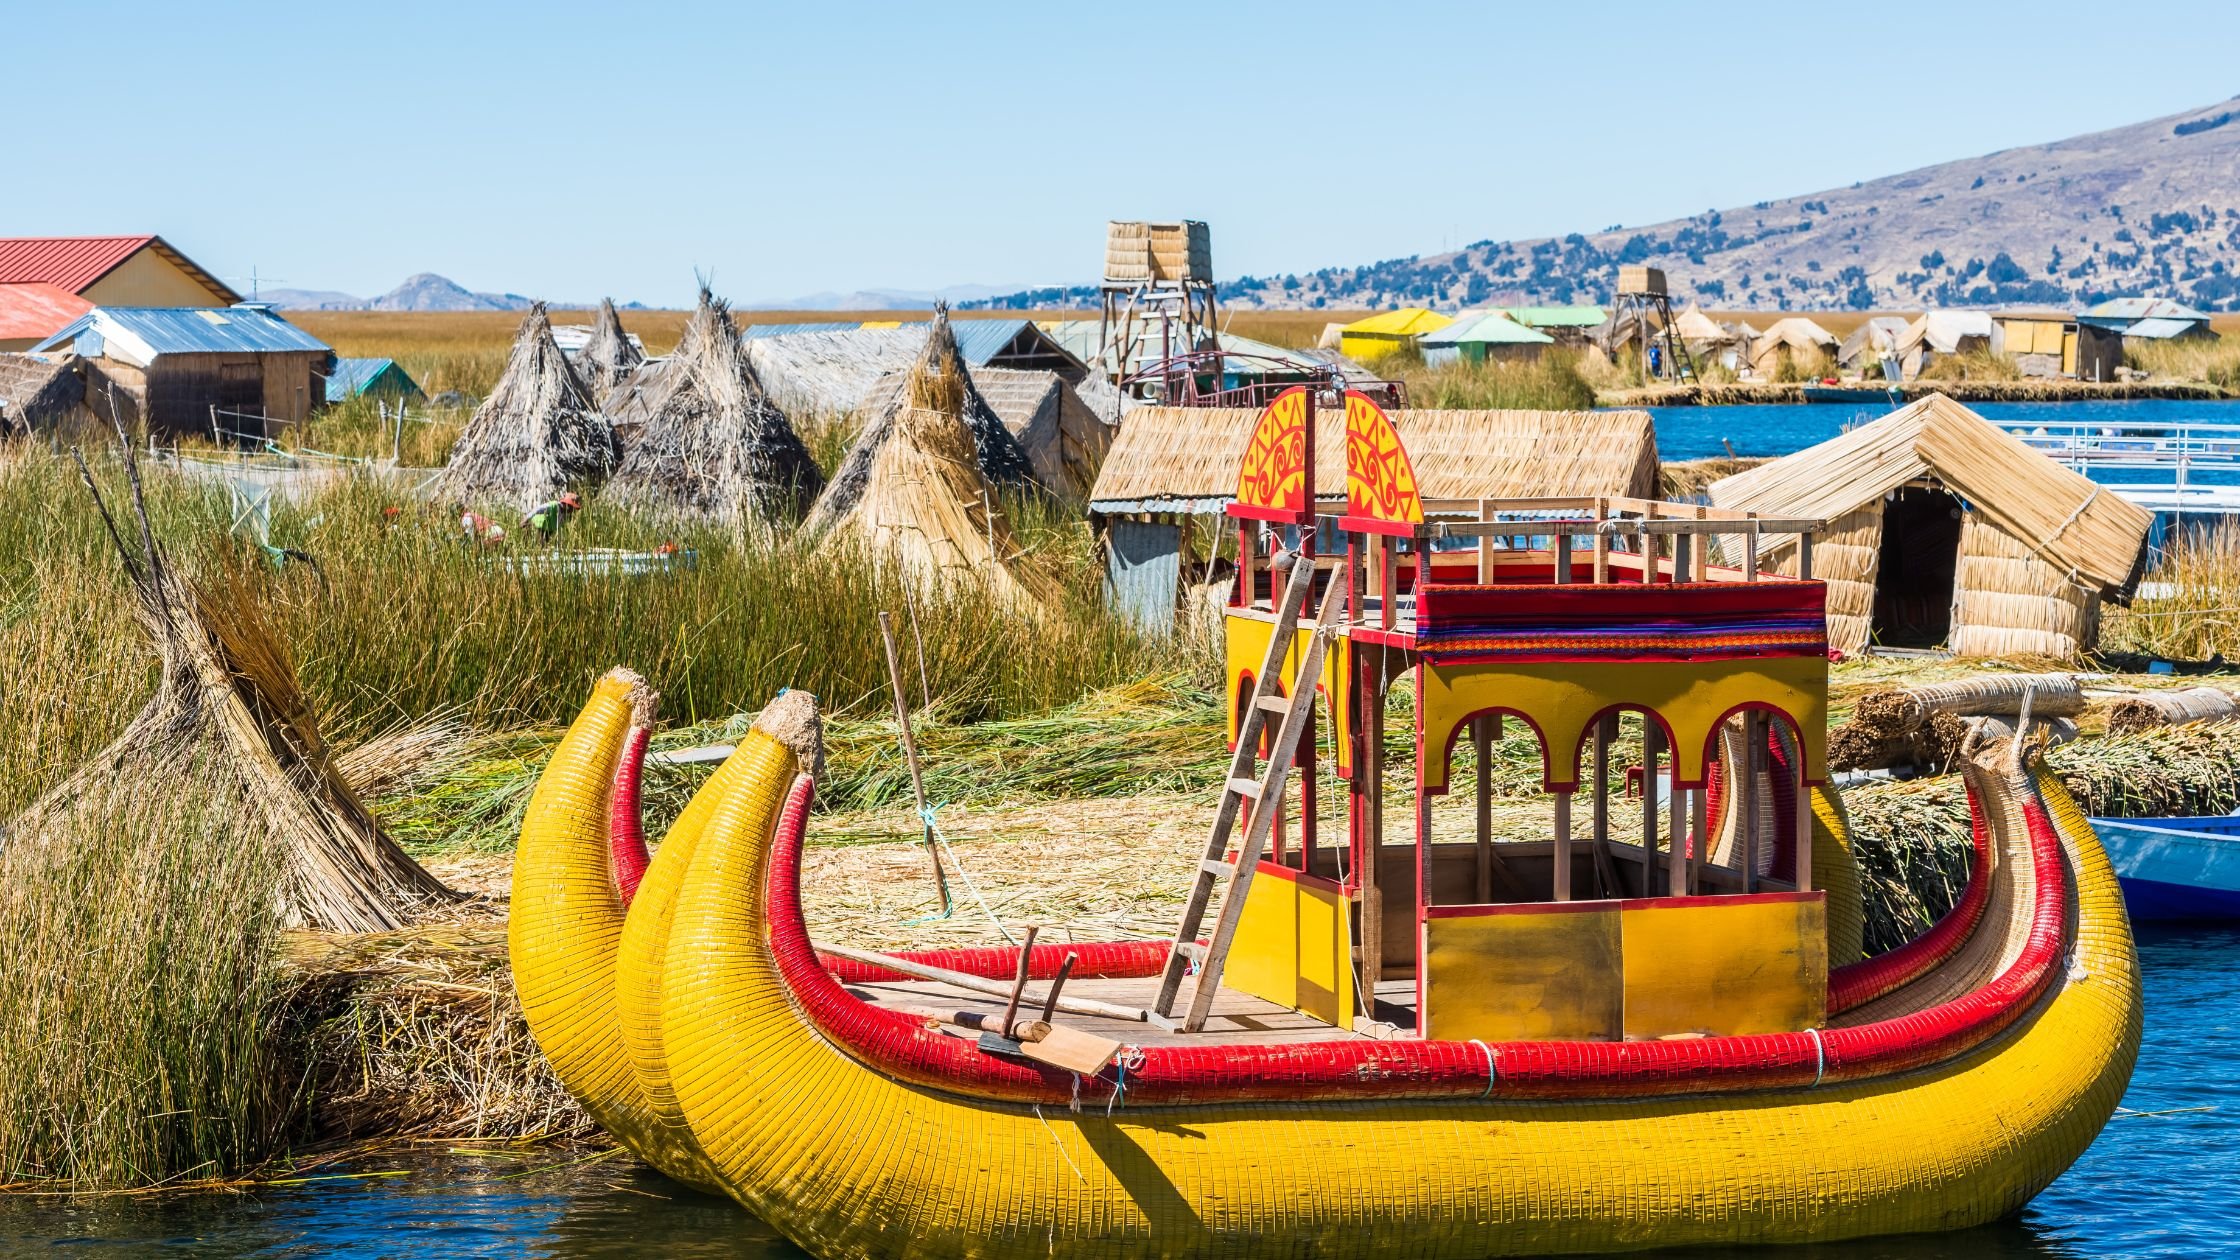 Boats moored in Lake Titicaca